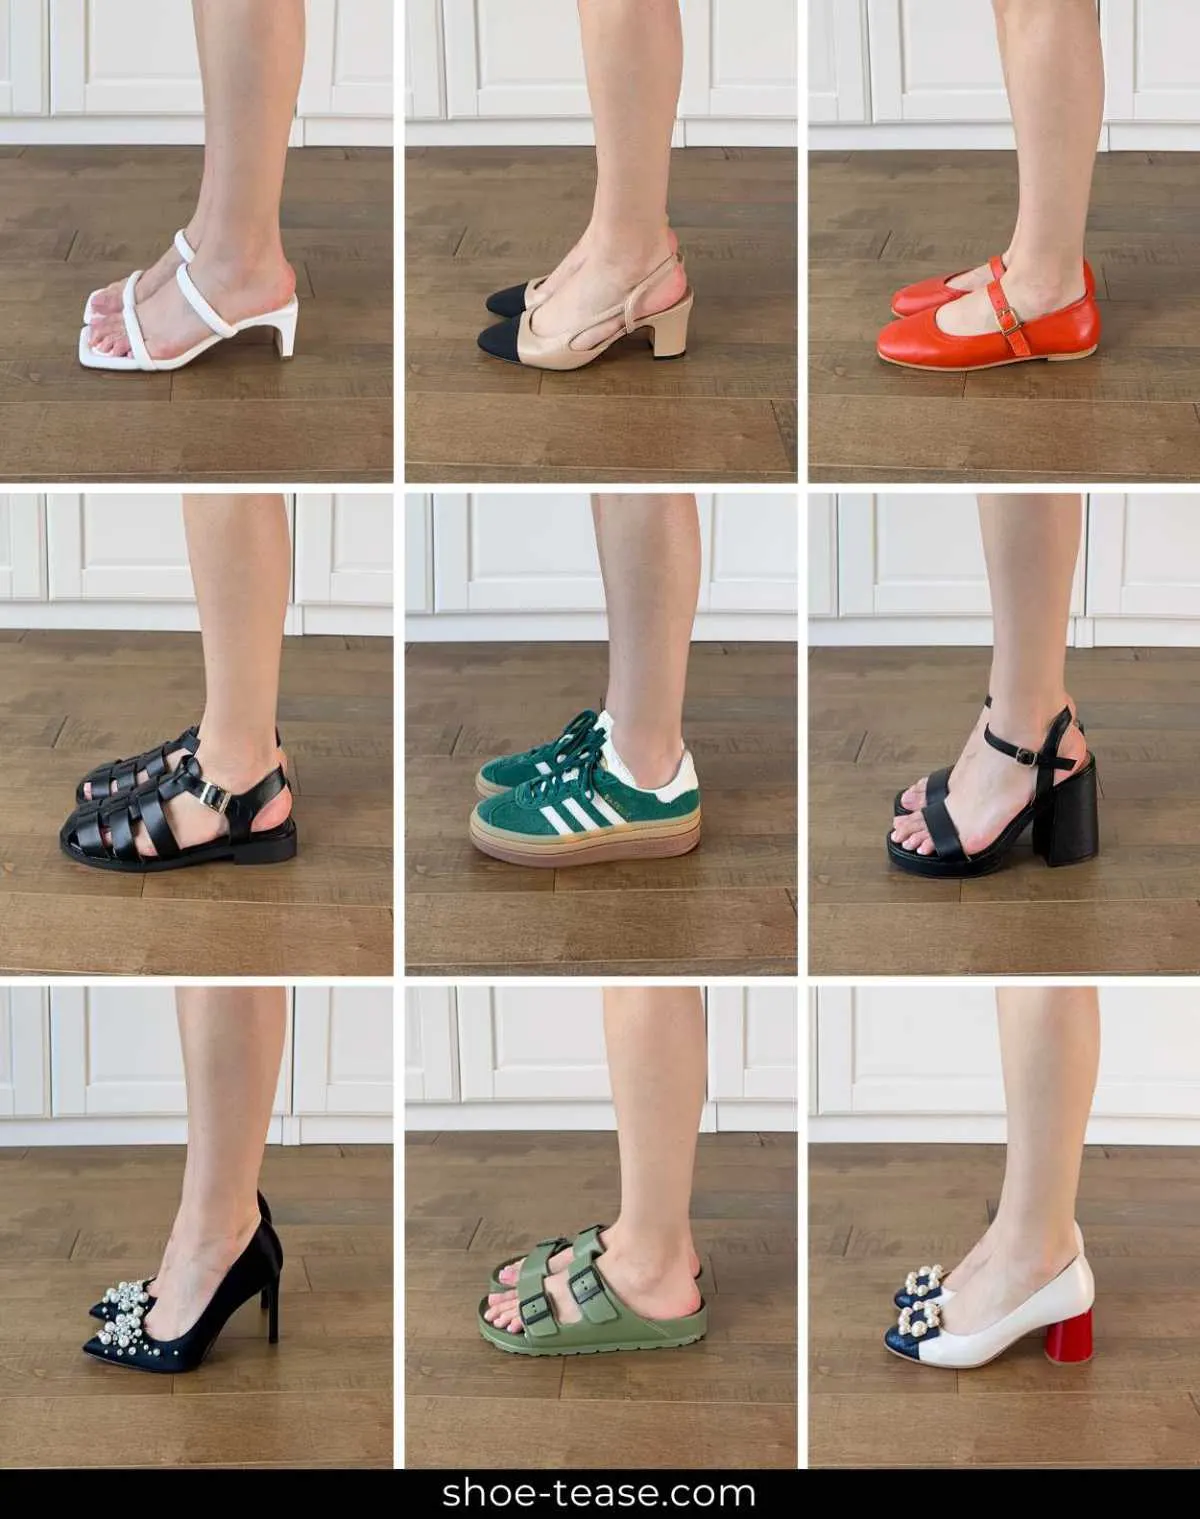 9 image collage showing cropped side views of woman wearing various shoes on a wooden floor.